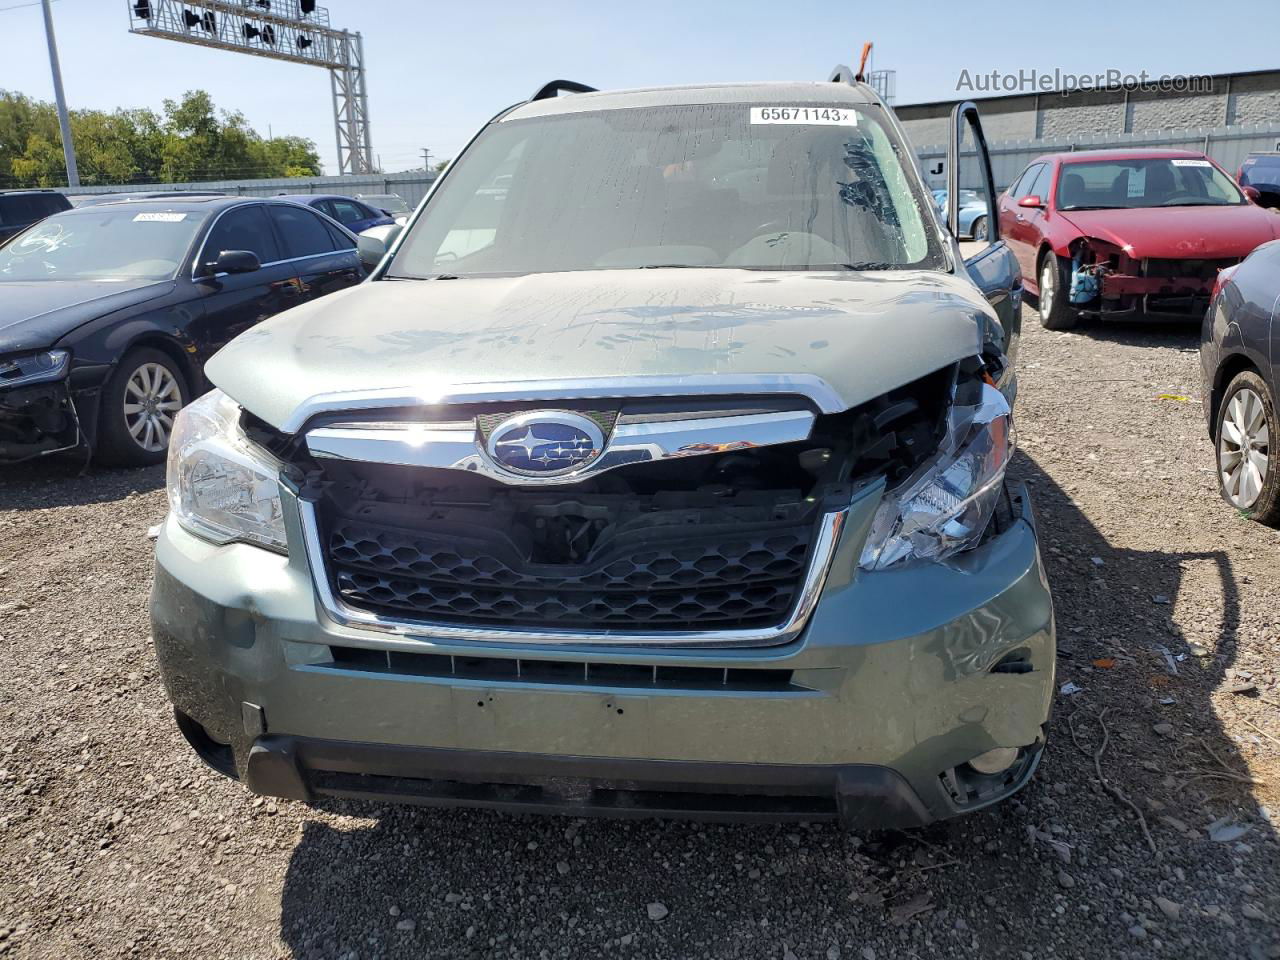 2016 Subaru Forester 2.5i Limited Green vin: JF2SJAHC0GH480273